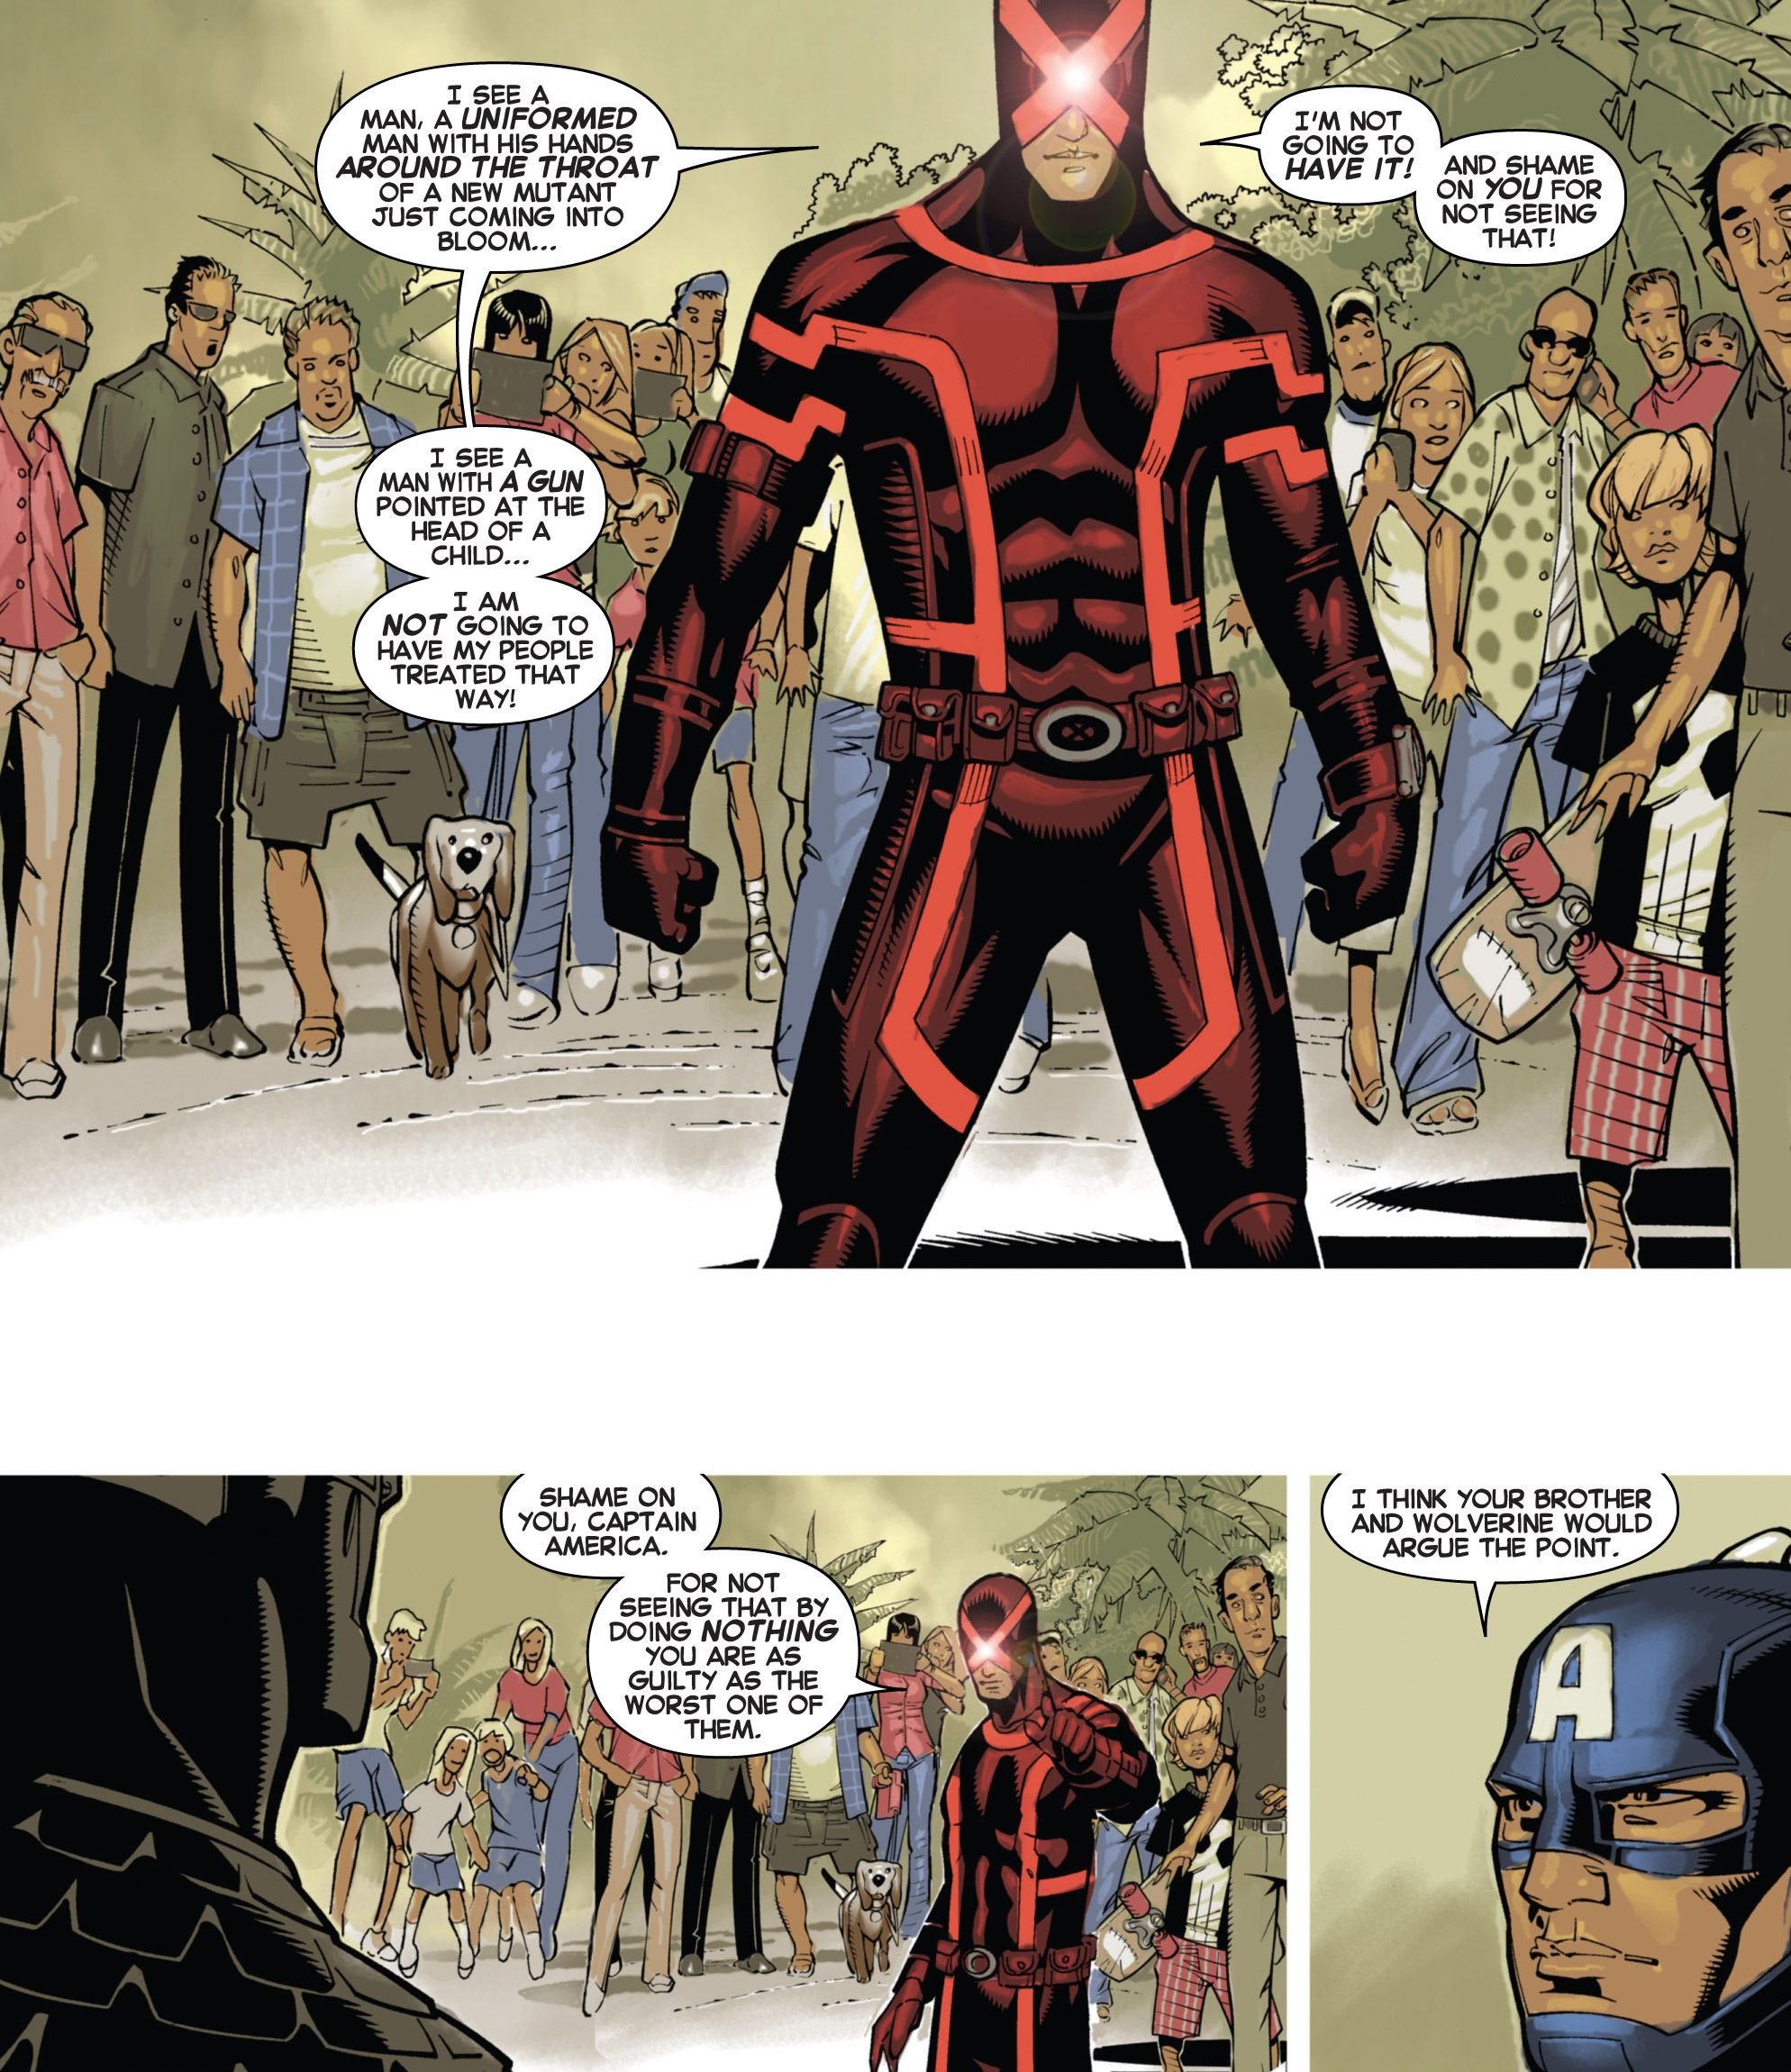 Cyclops stands up to Captain America for not supporting mutants. 